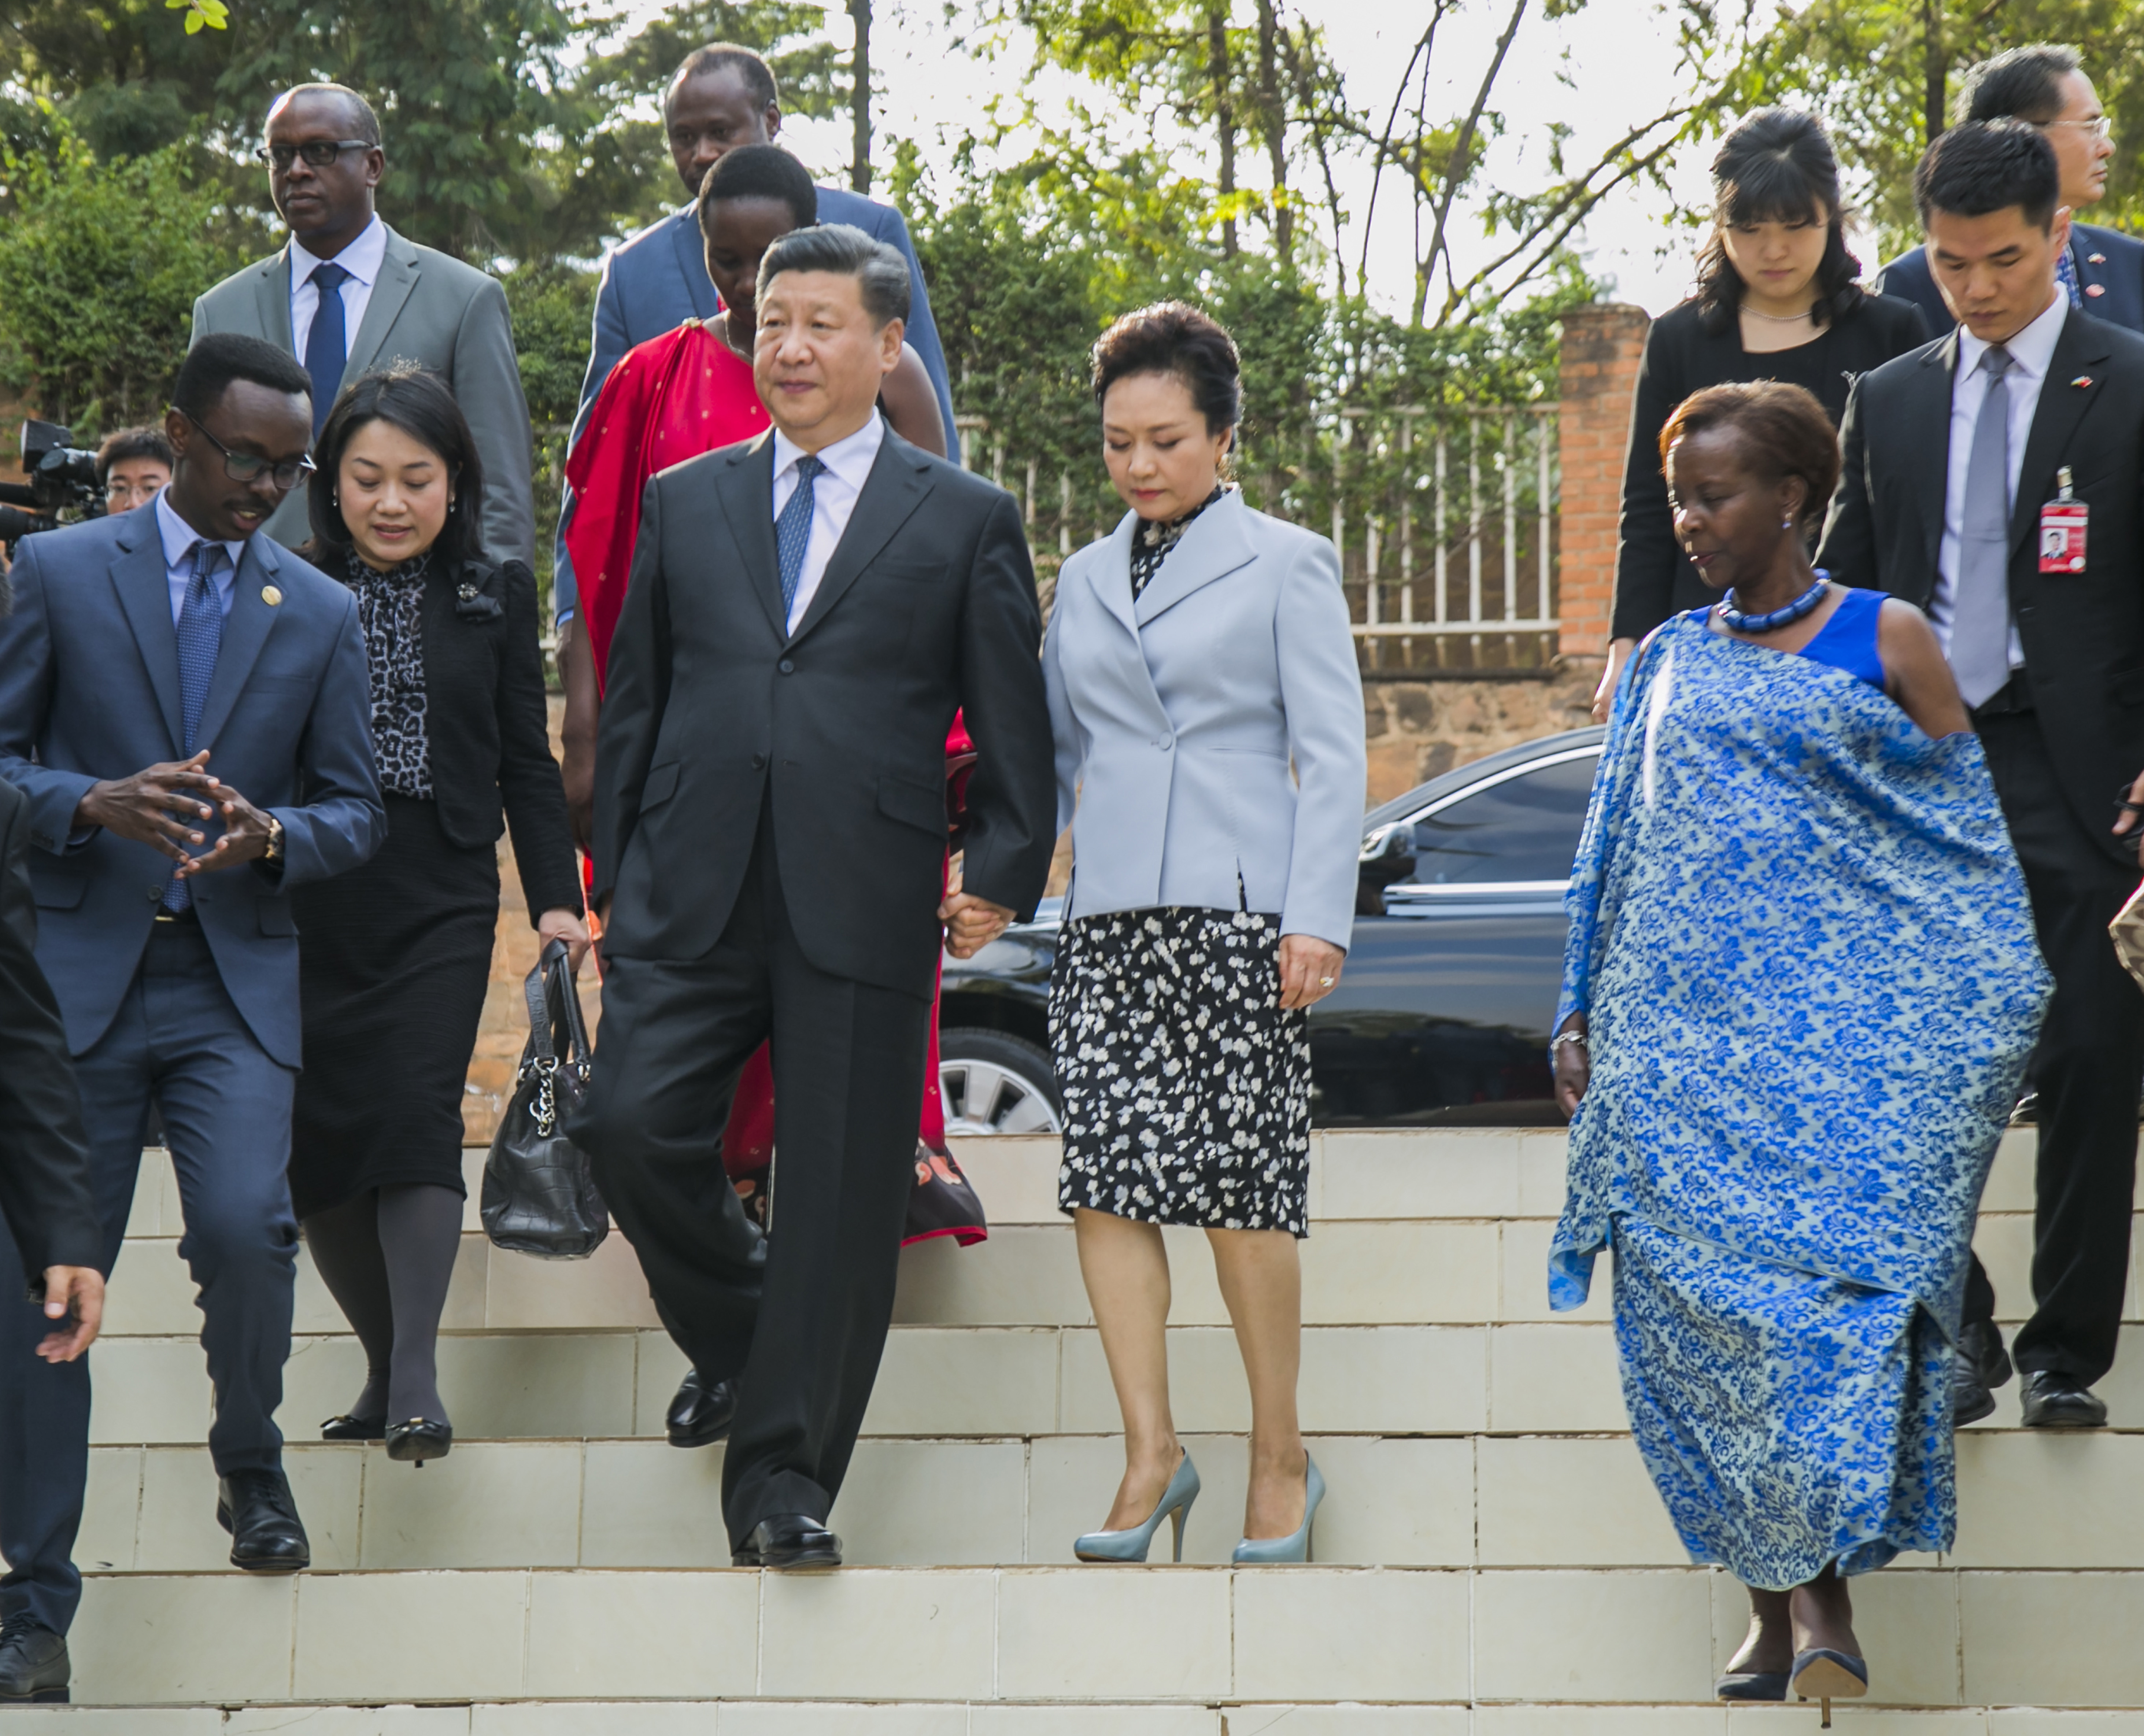 Chinese President Xi Jinping and his wife Peng Liyuan accompanied by Rwanda's Minister of Foreigh Affairs Louise Mushikiwabo, far right, arrive at the Kigali Memorial Center on Monday,July 23, 2018 as part of his two day state visit to Rwanda. Xi is the first Chinese president to visit Rwanda.
(AP Photo)